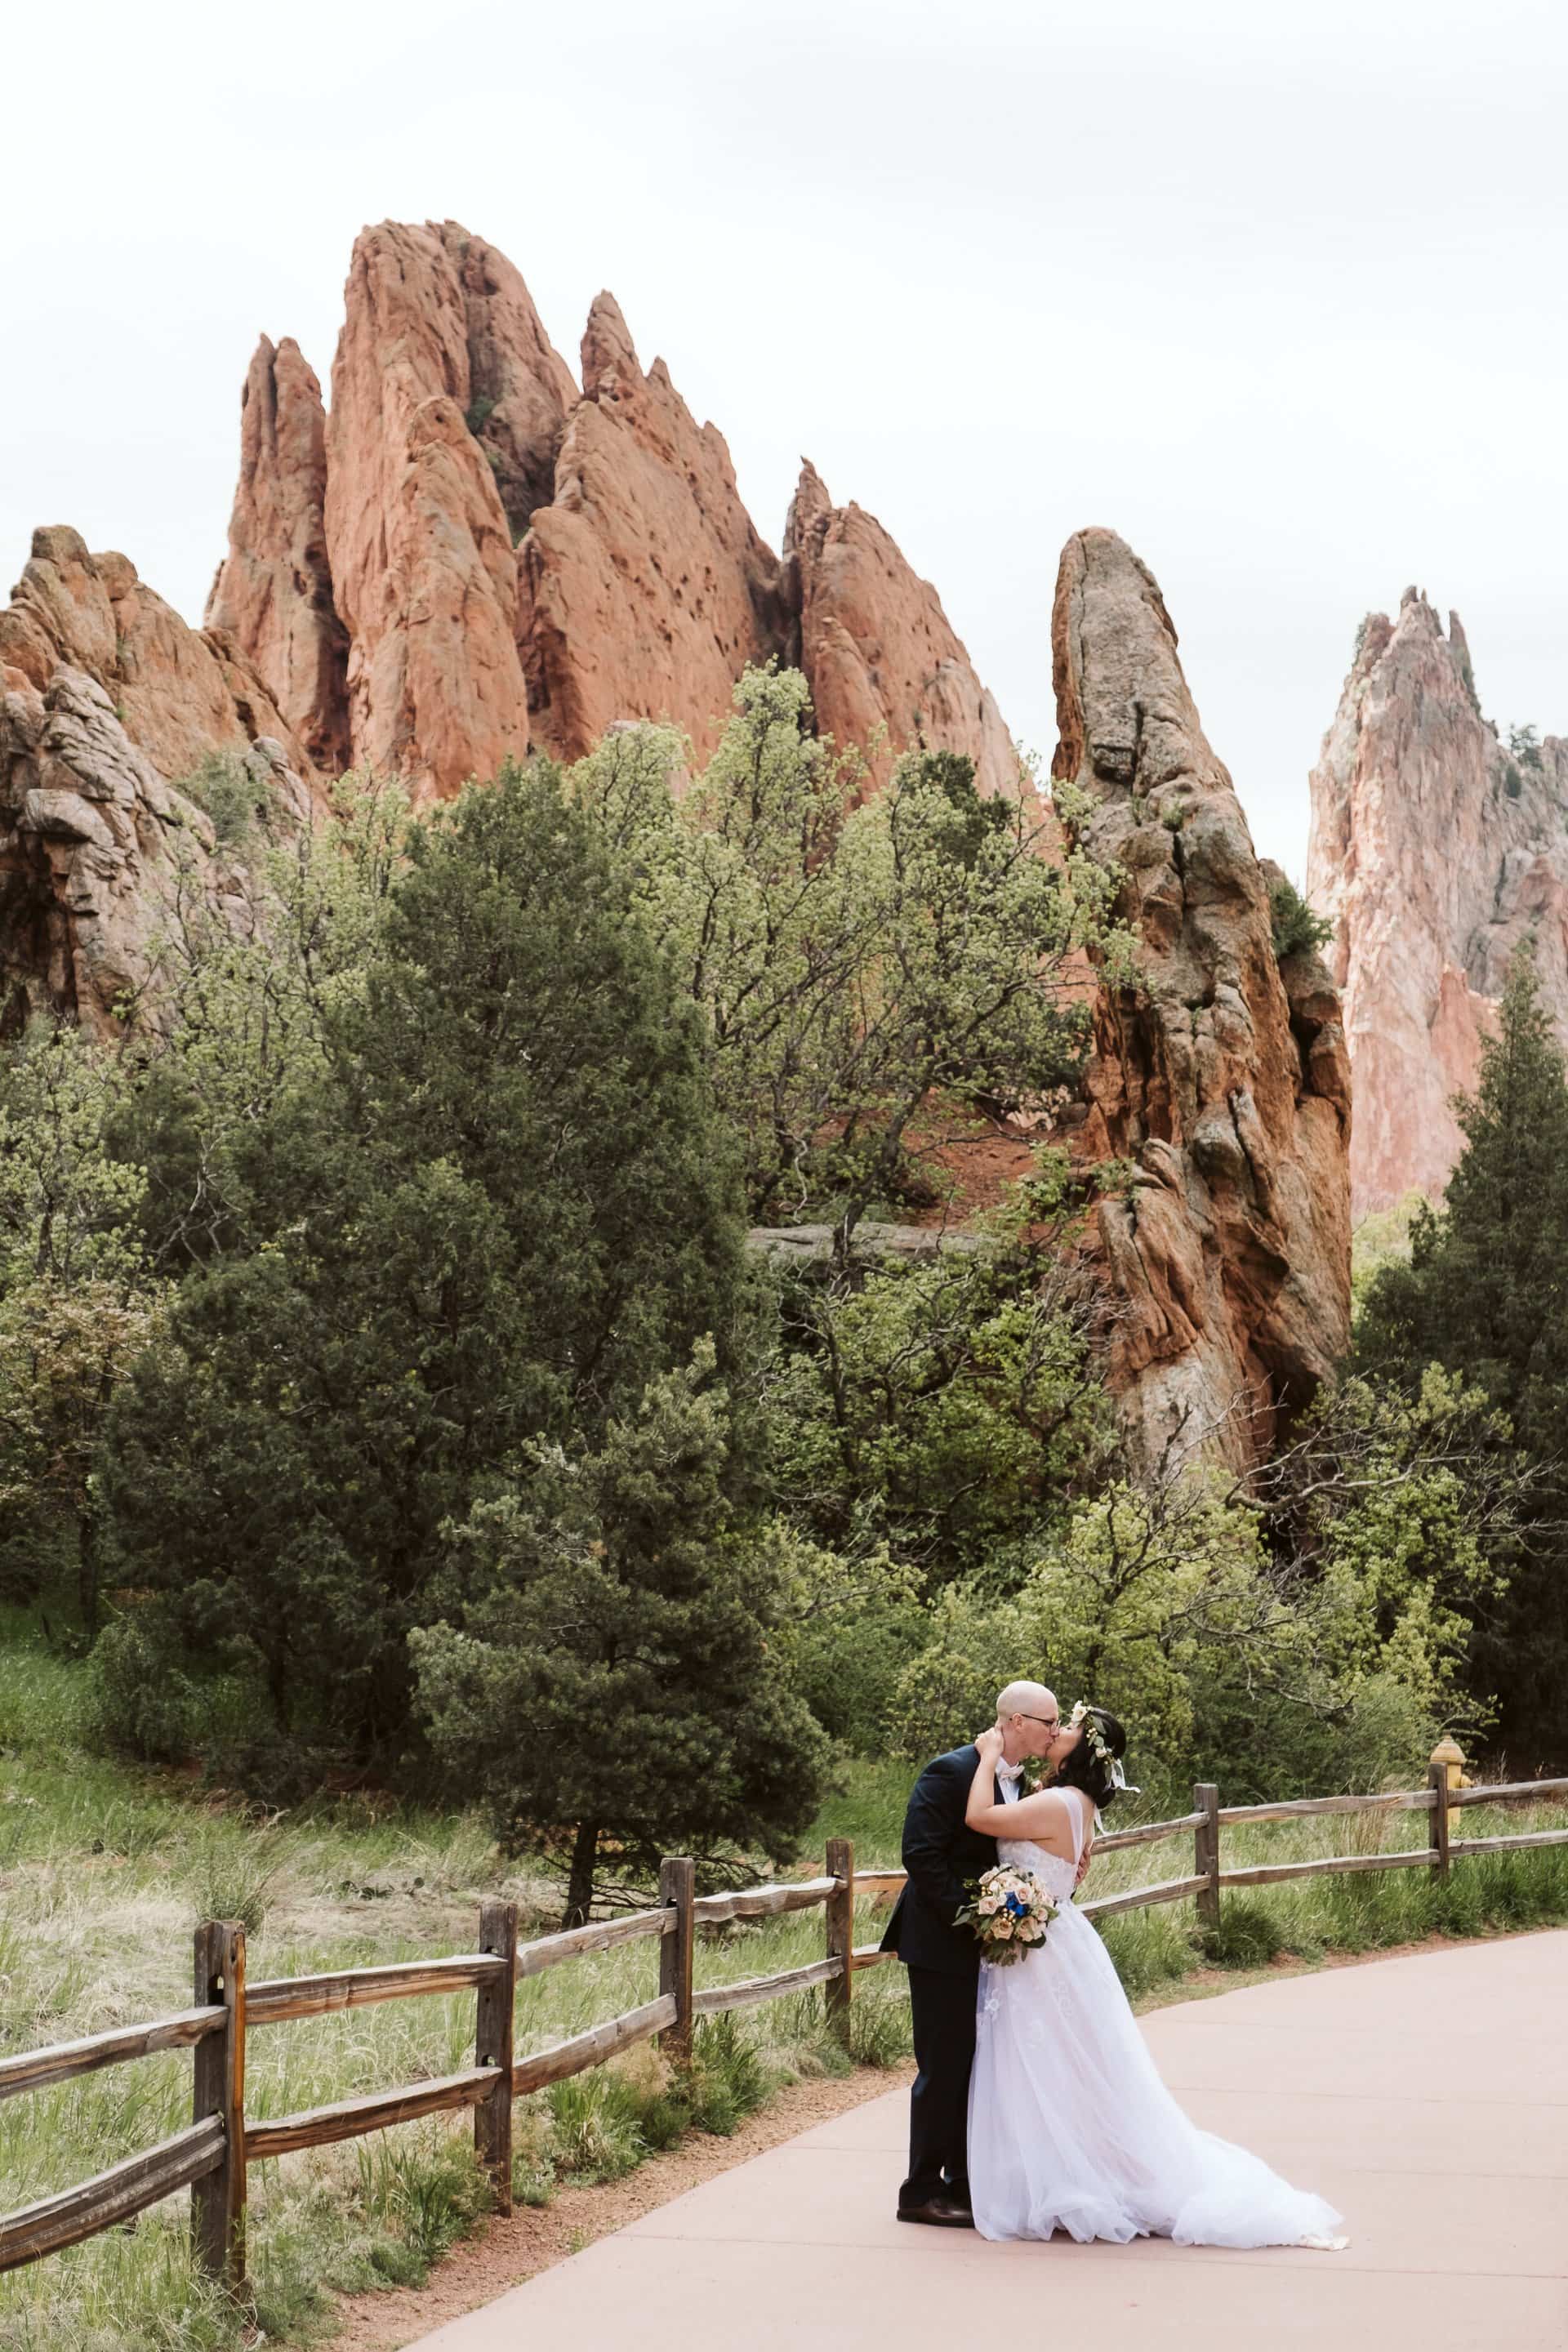 Bride and groom hiking along the trails of Garden of the Gods in Colorado Springs, Colorado elopement photographer